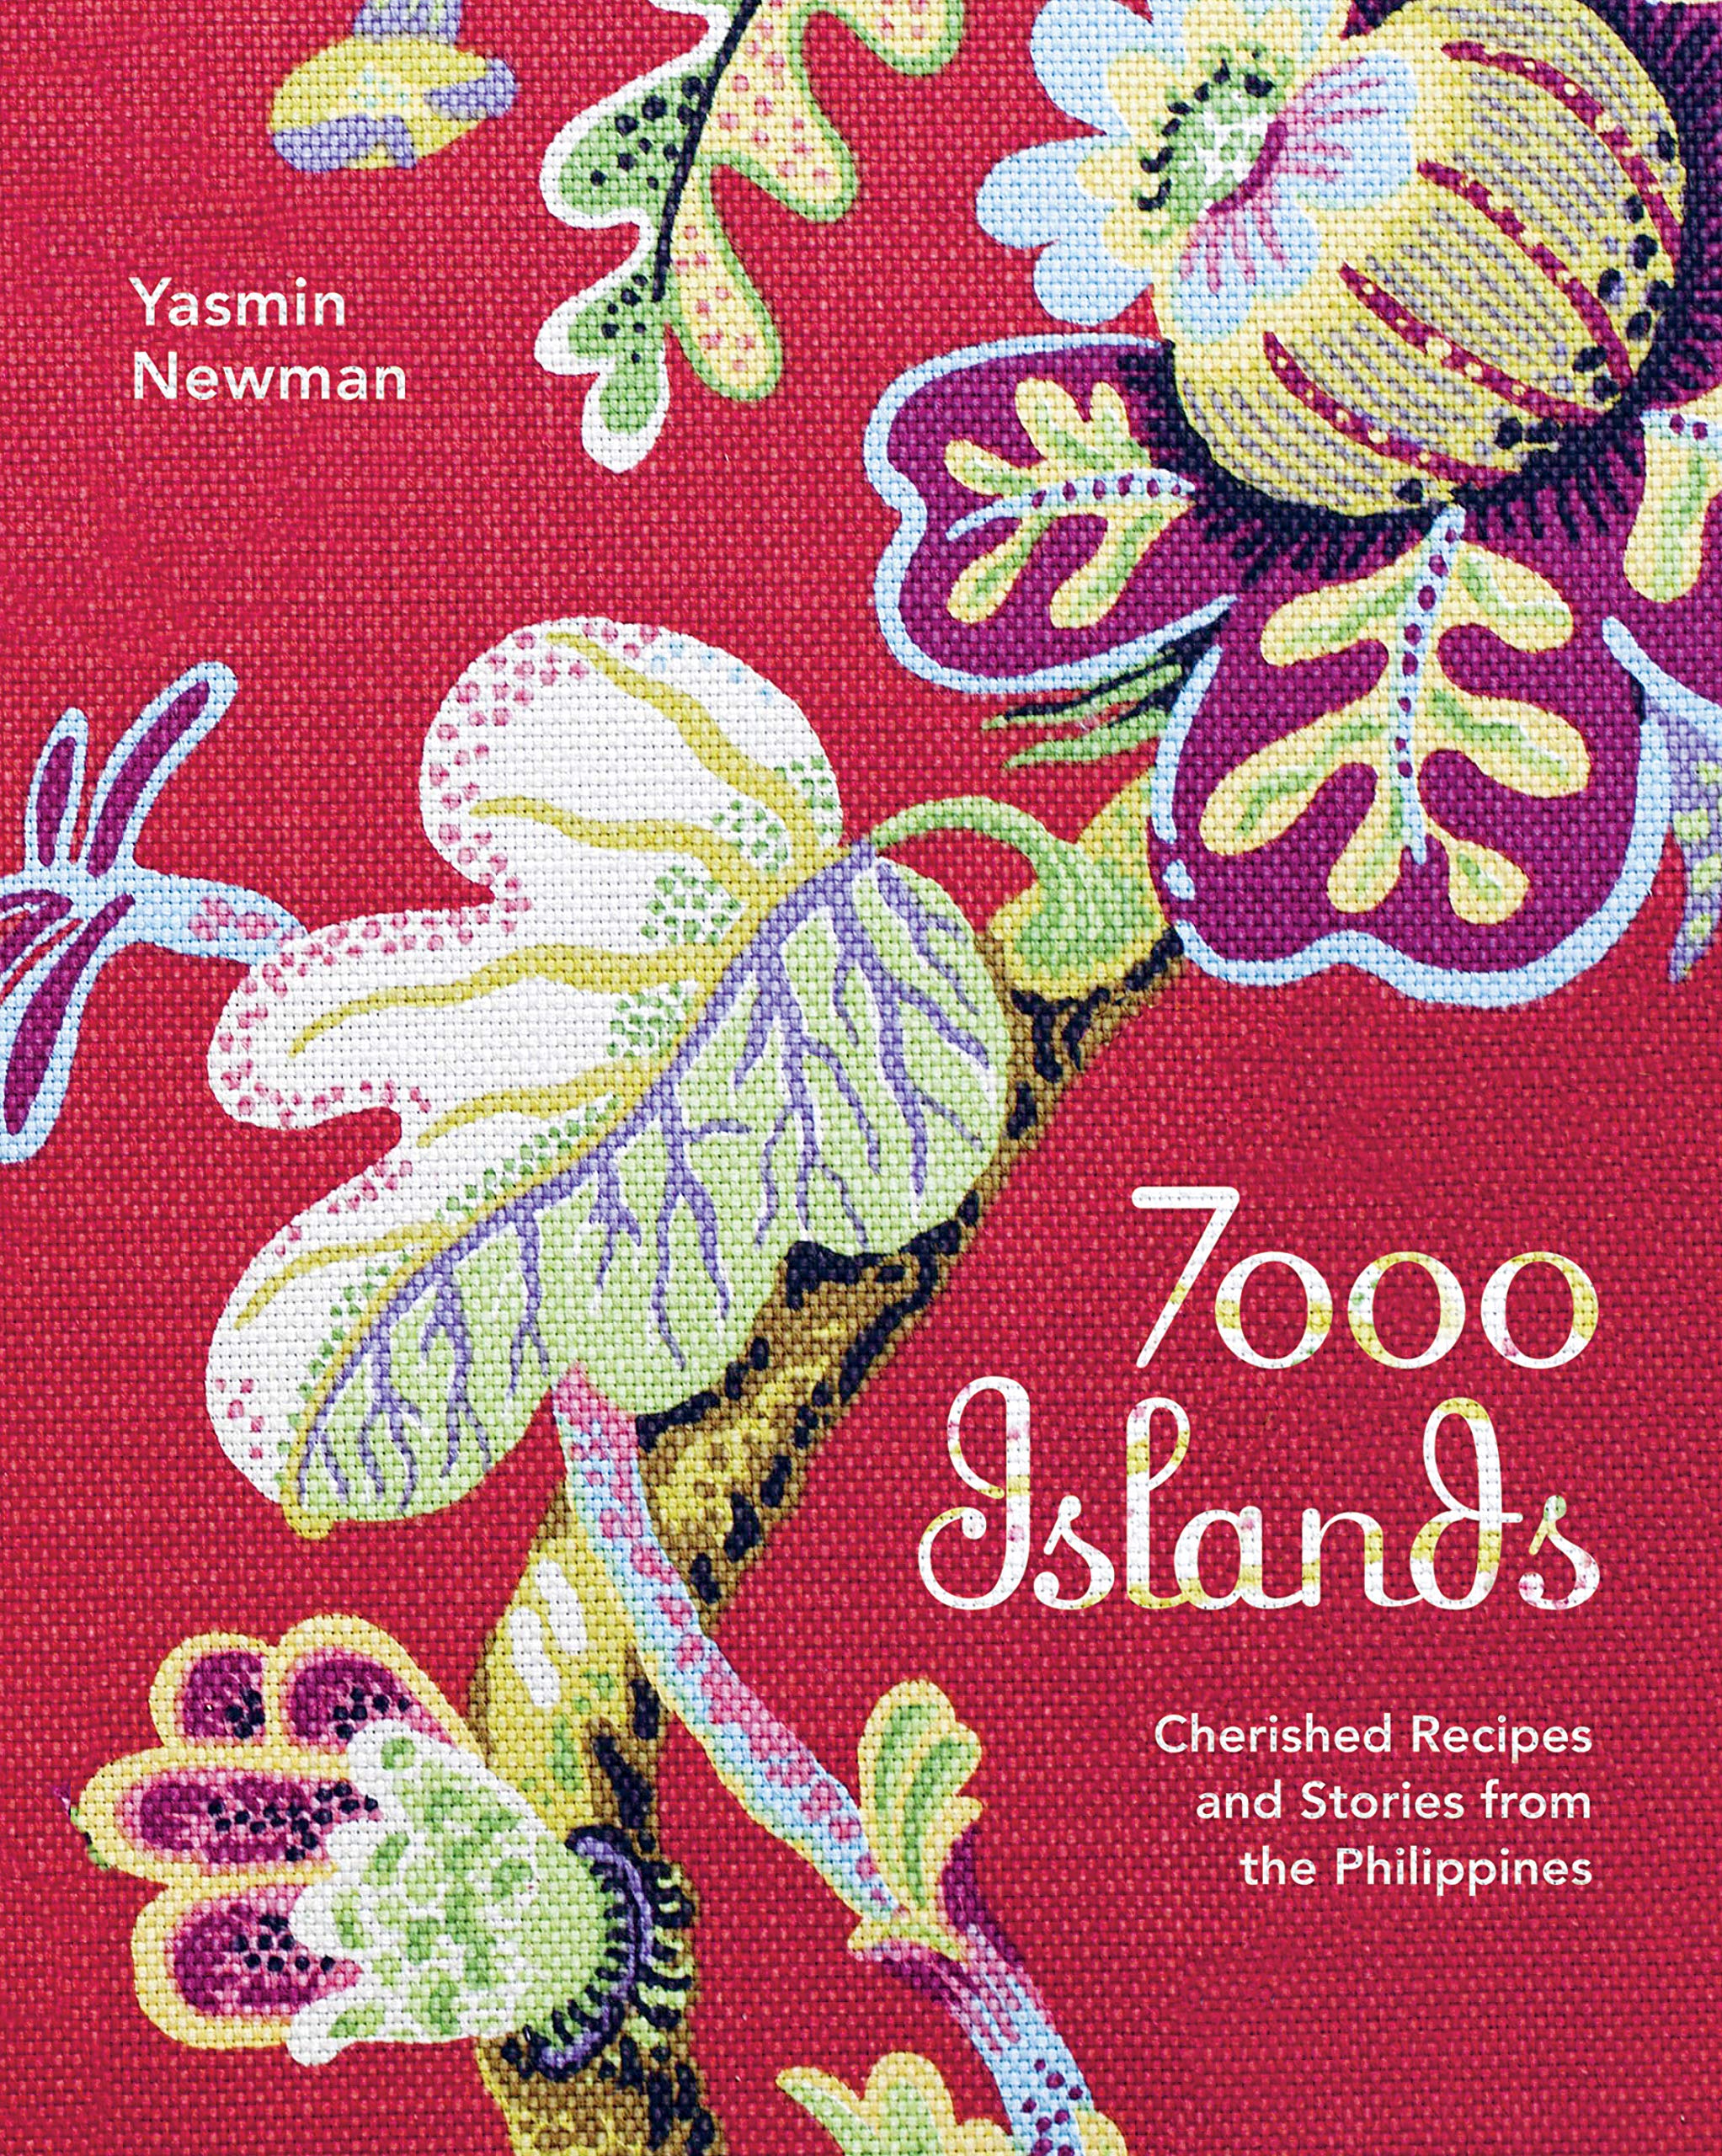 7000 Islands: Cherished Recipes and Stories from the Philippines (Yasmin Newman)